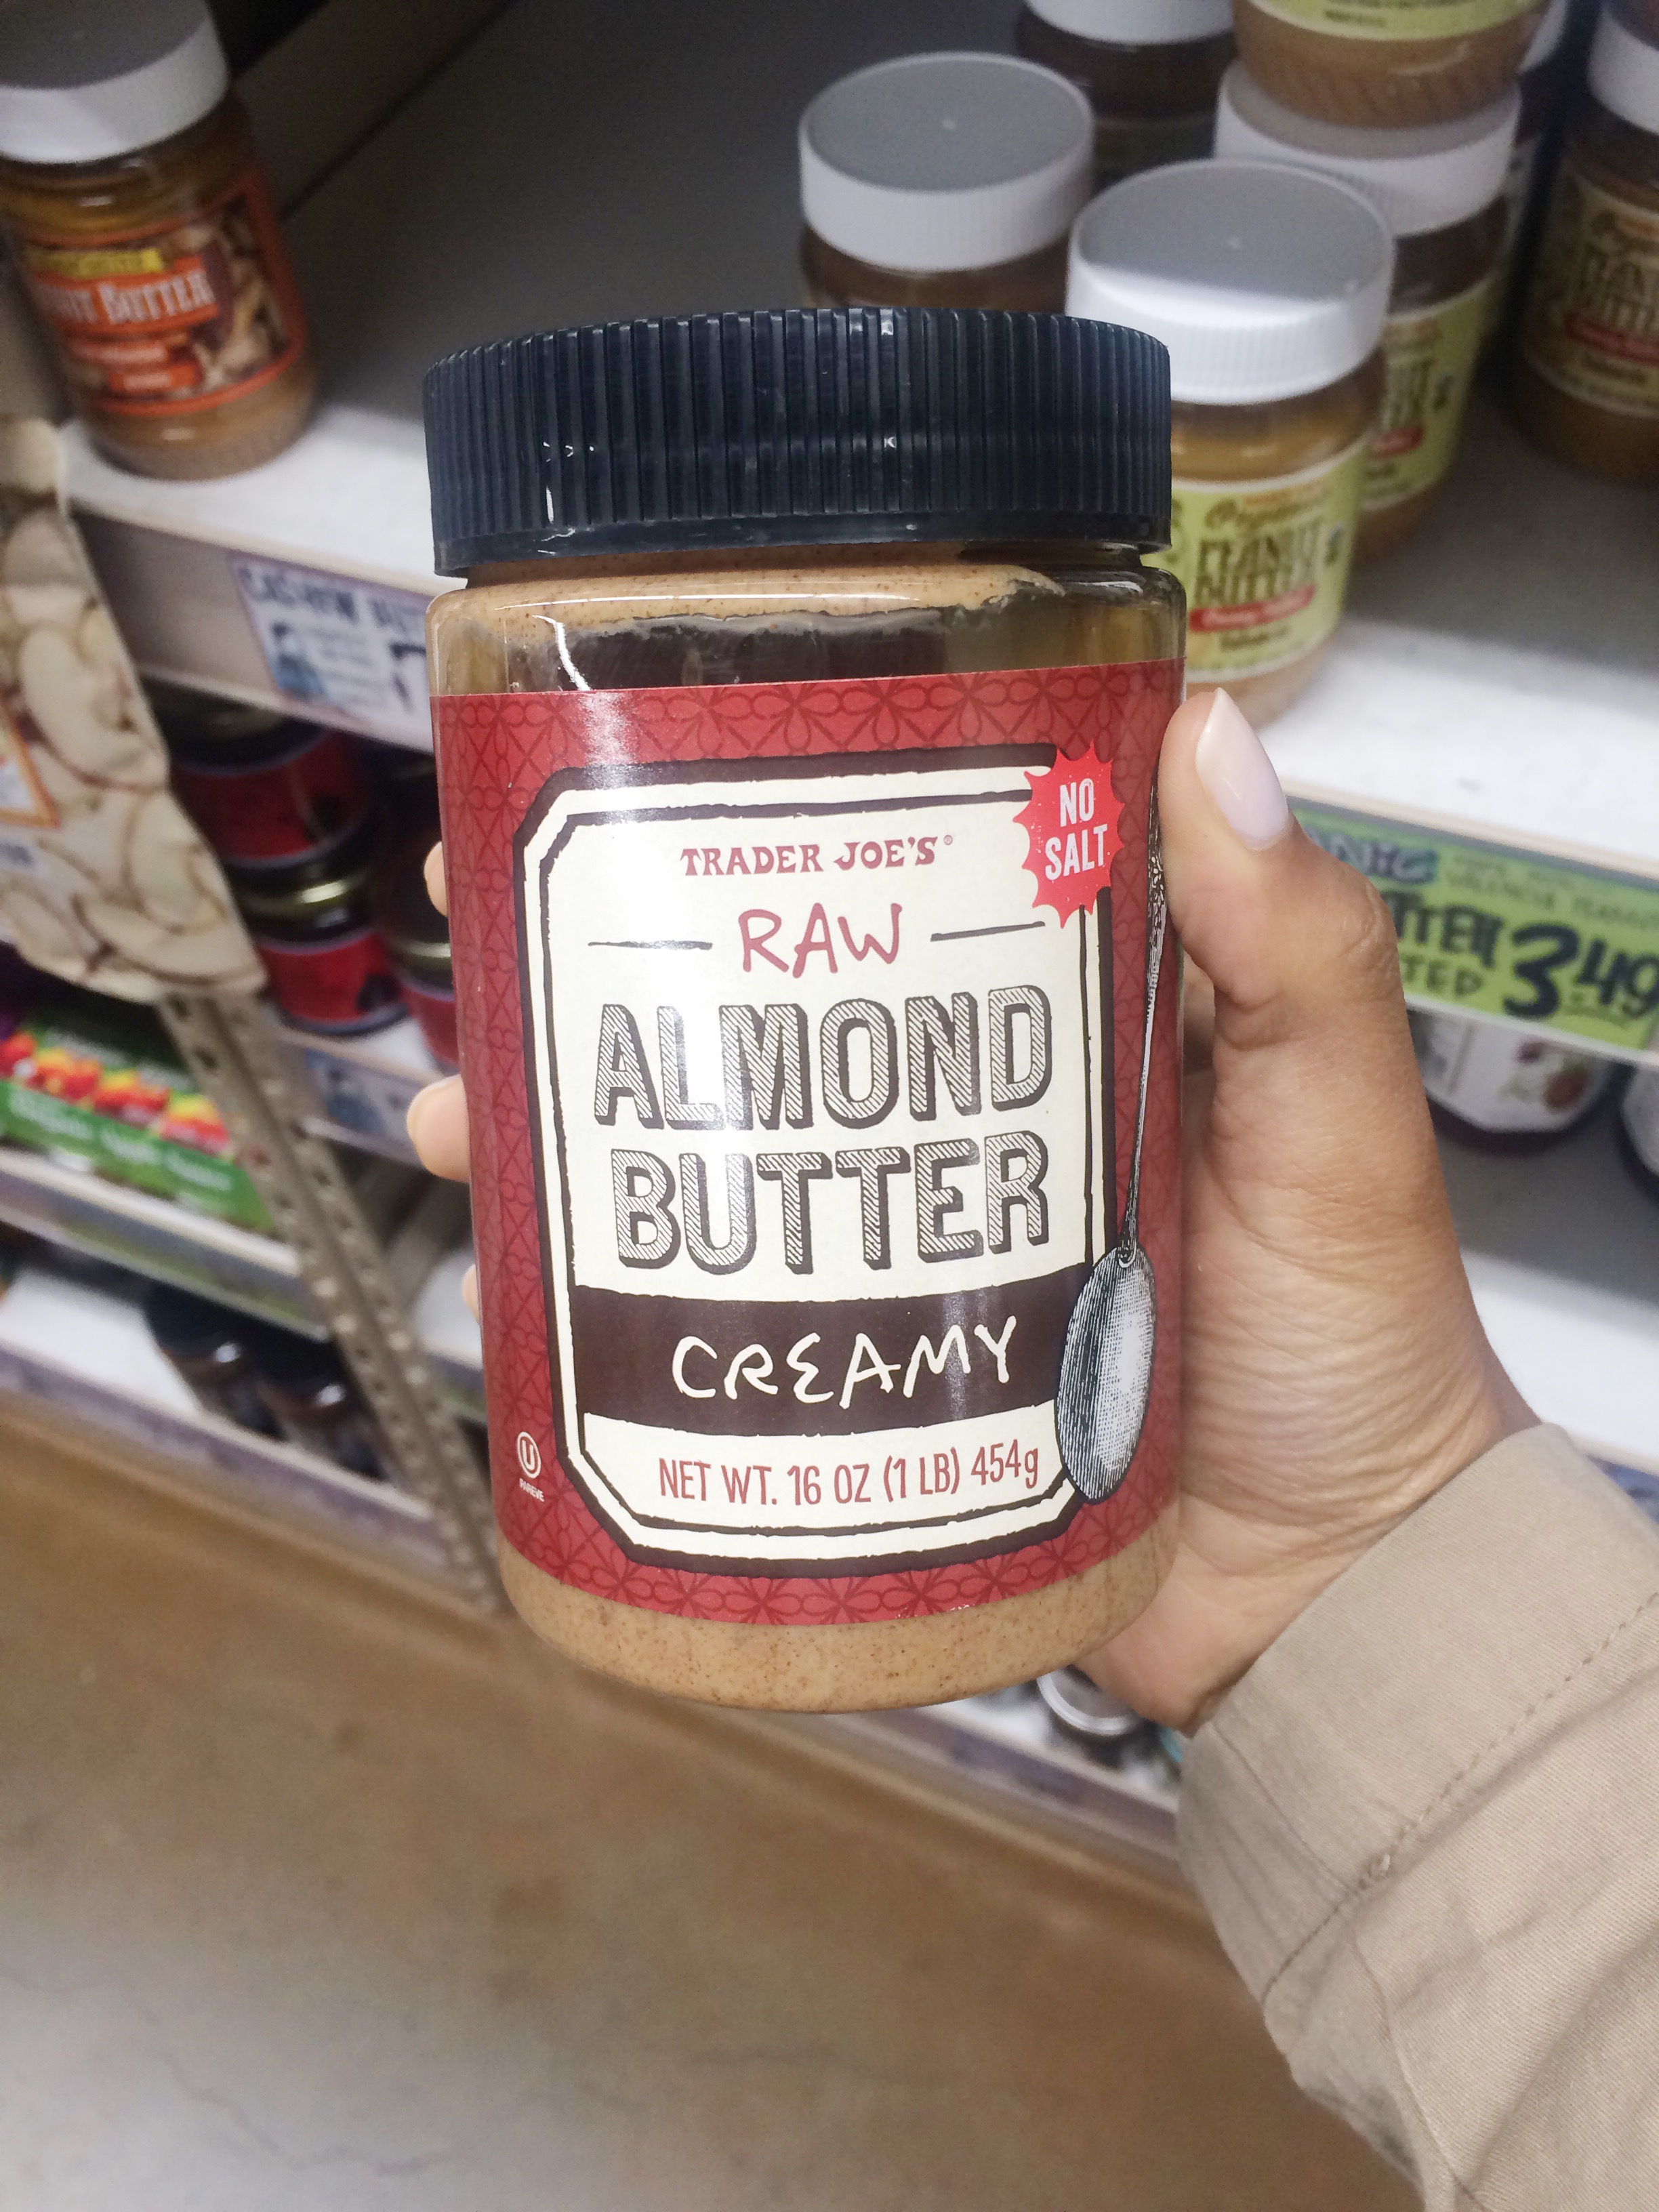 What to buy from Trader Joe's - affordable healthy grocery staples!